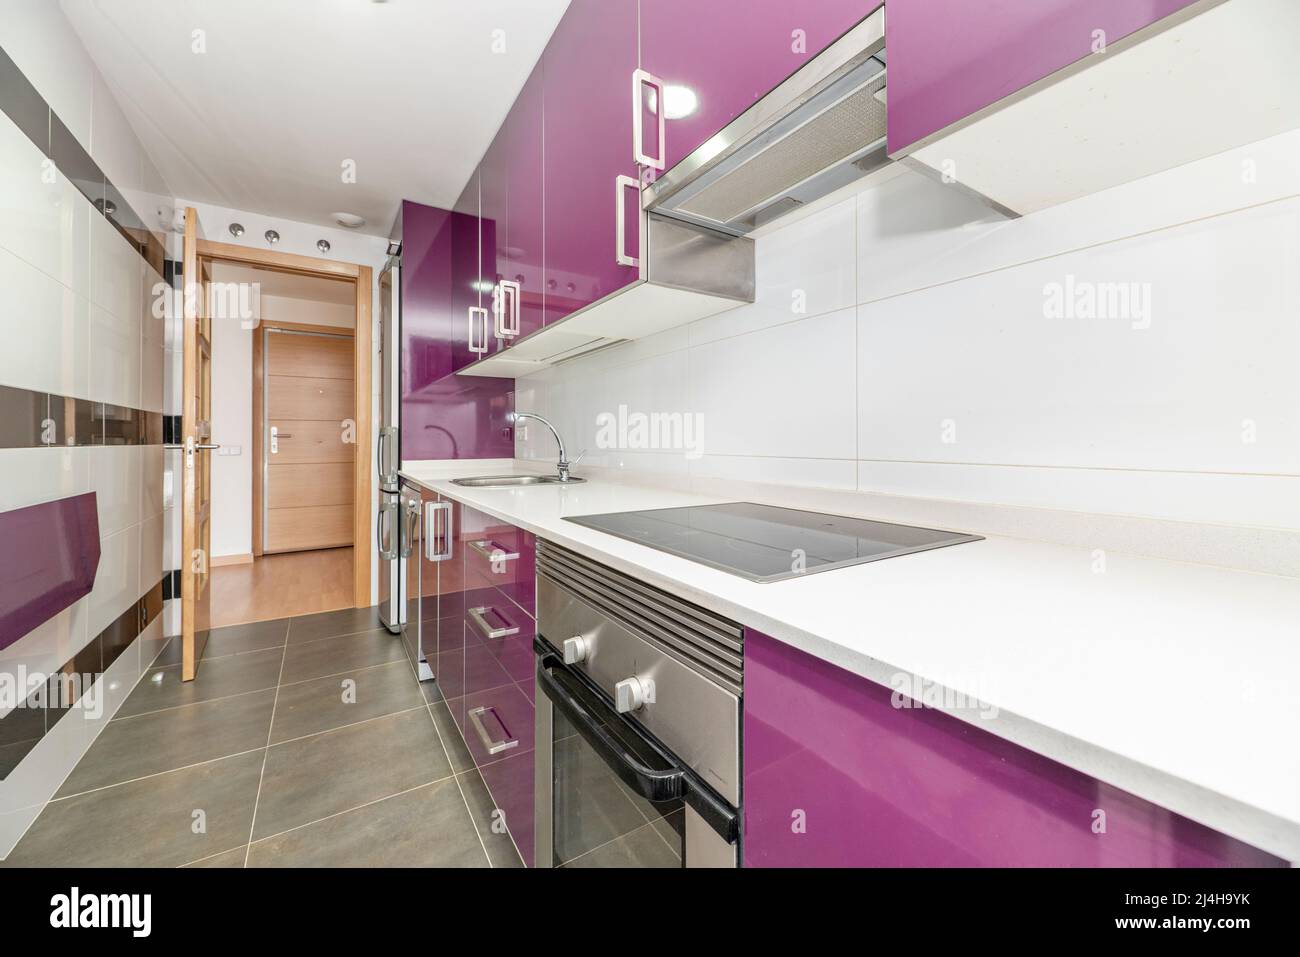 Kitchen with white stone countertops, bright purple wood cabinets